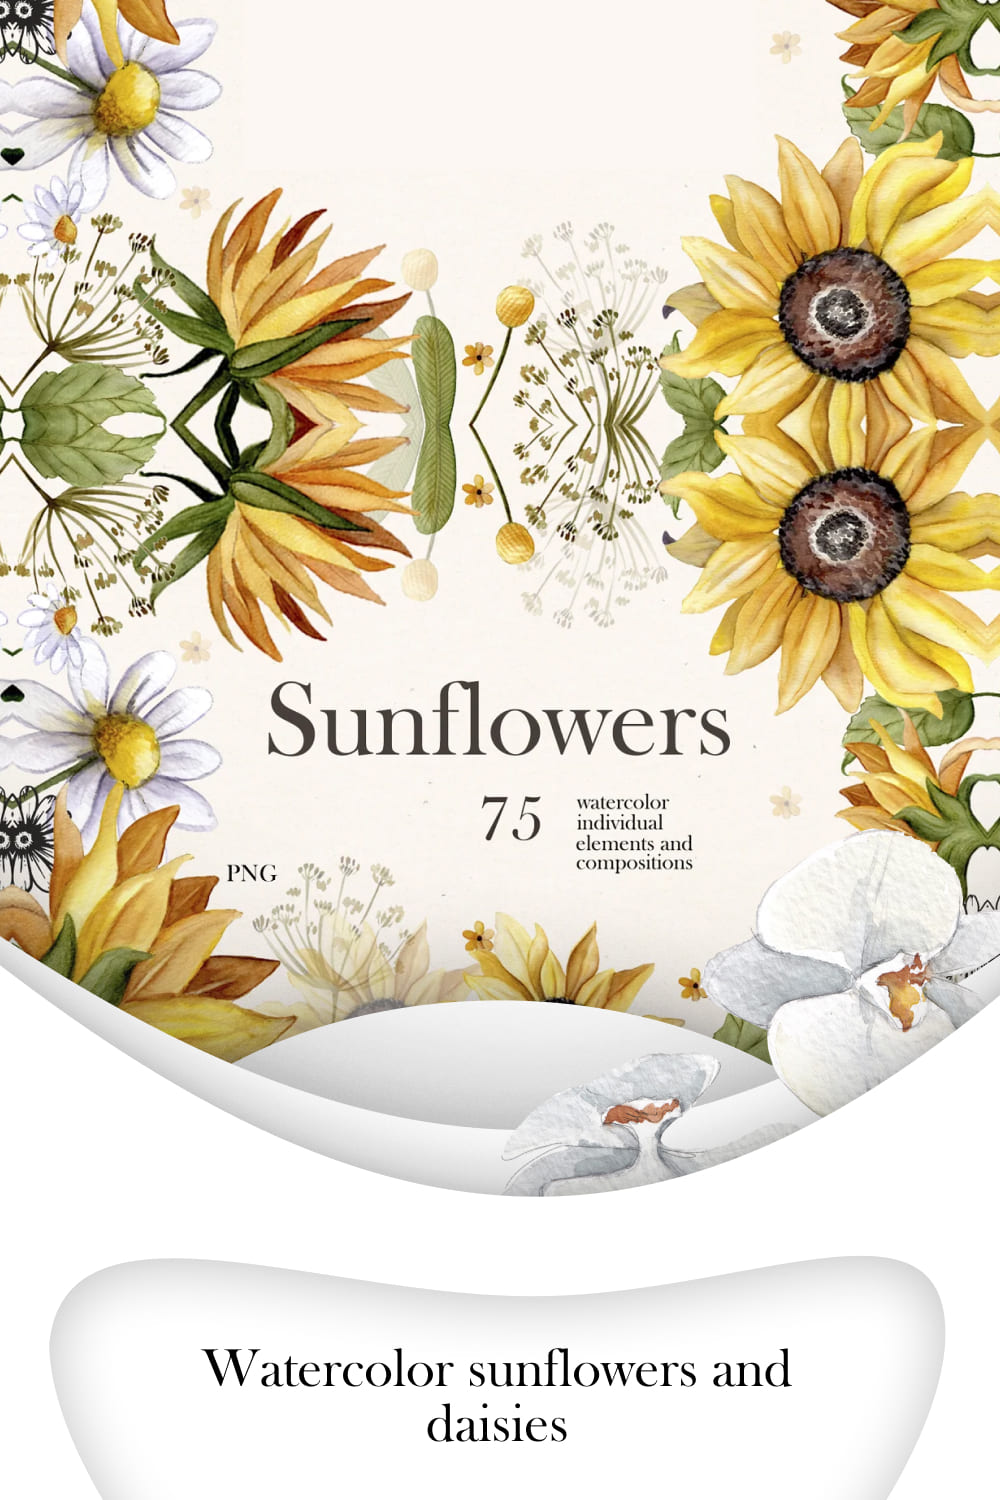 03 watercolor sunflowers and daisies1000x1500